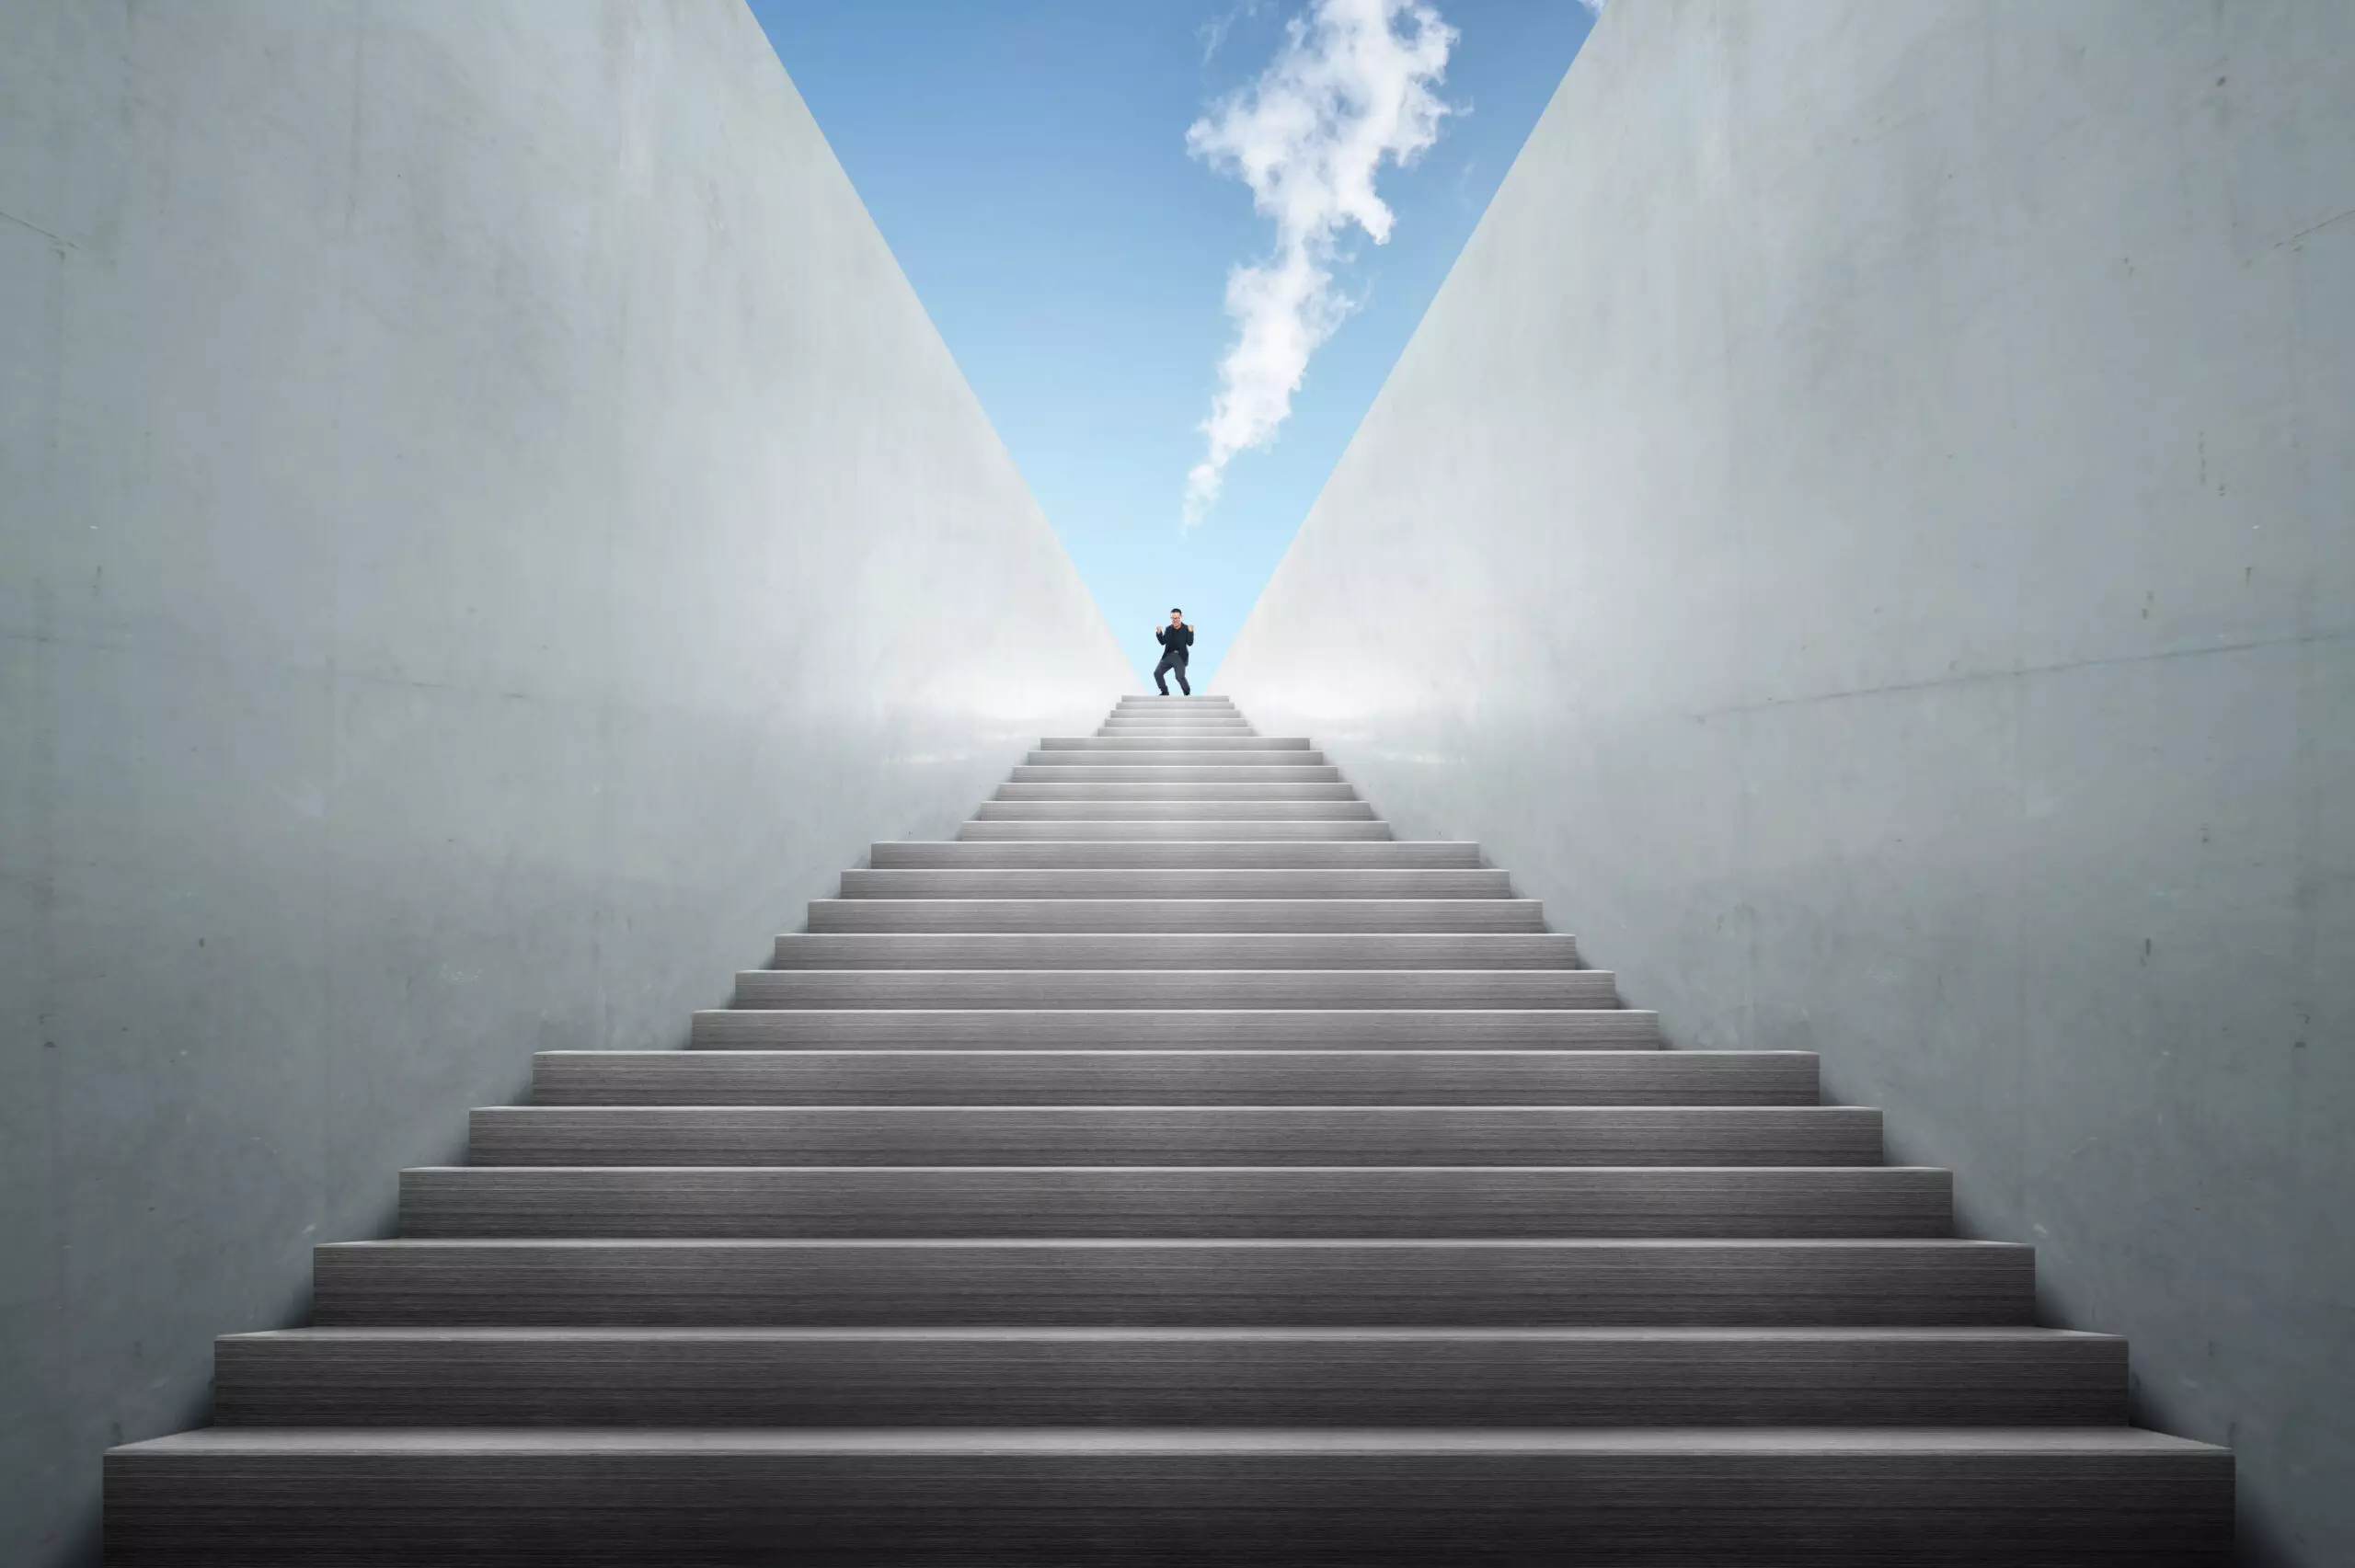 Person ascending modern concrete staircase against sky.